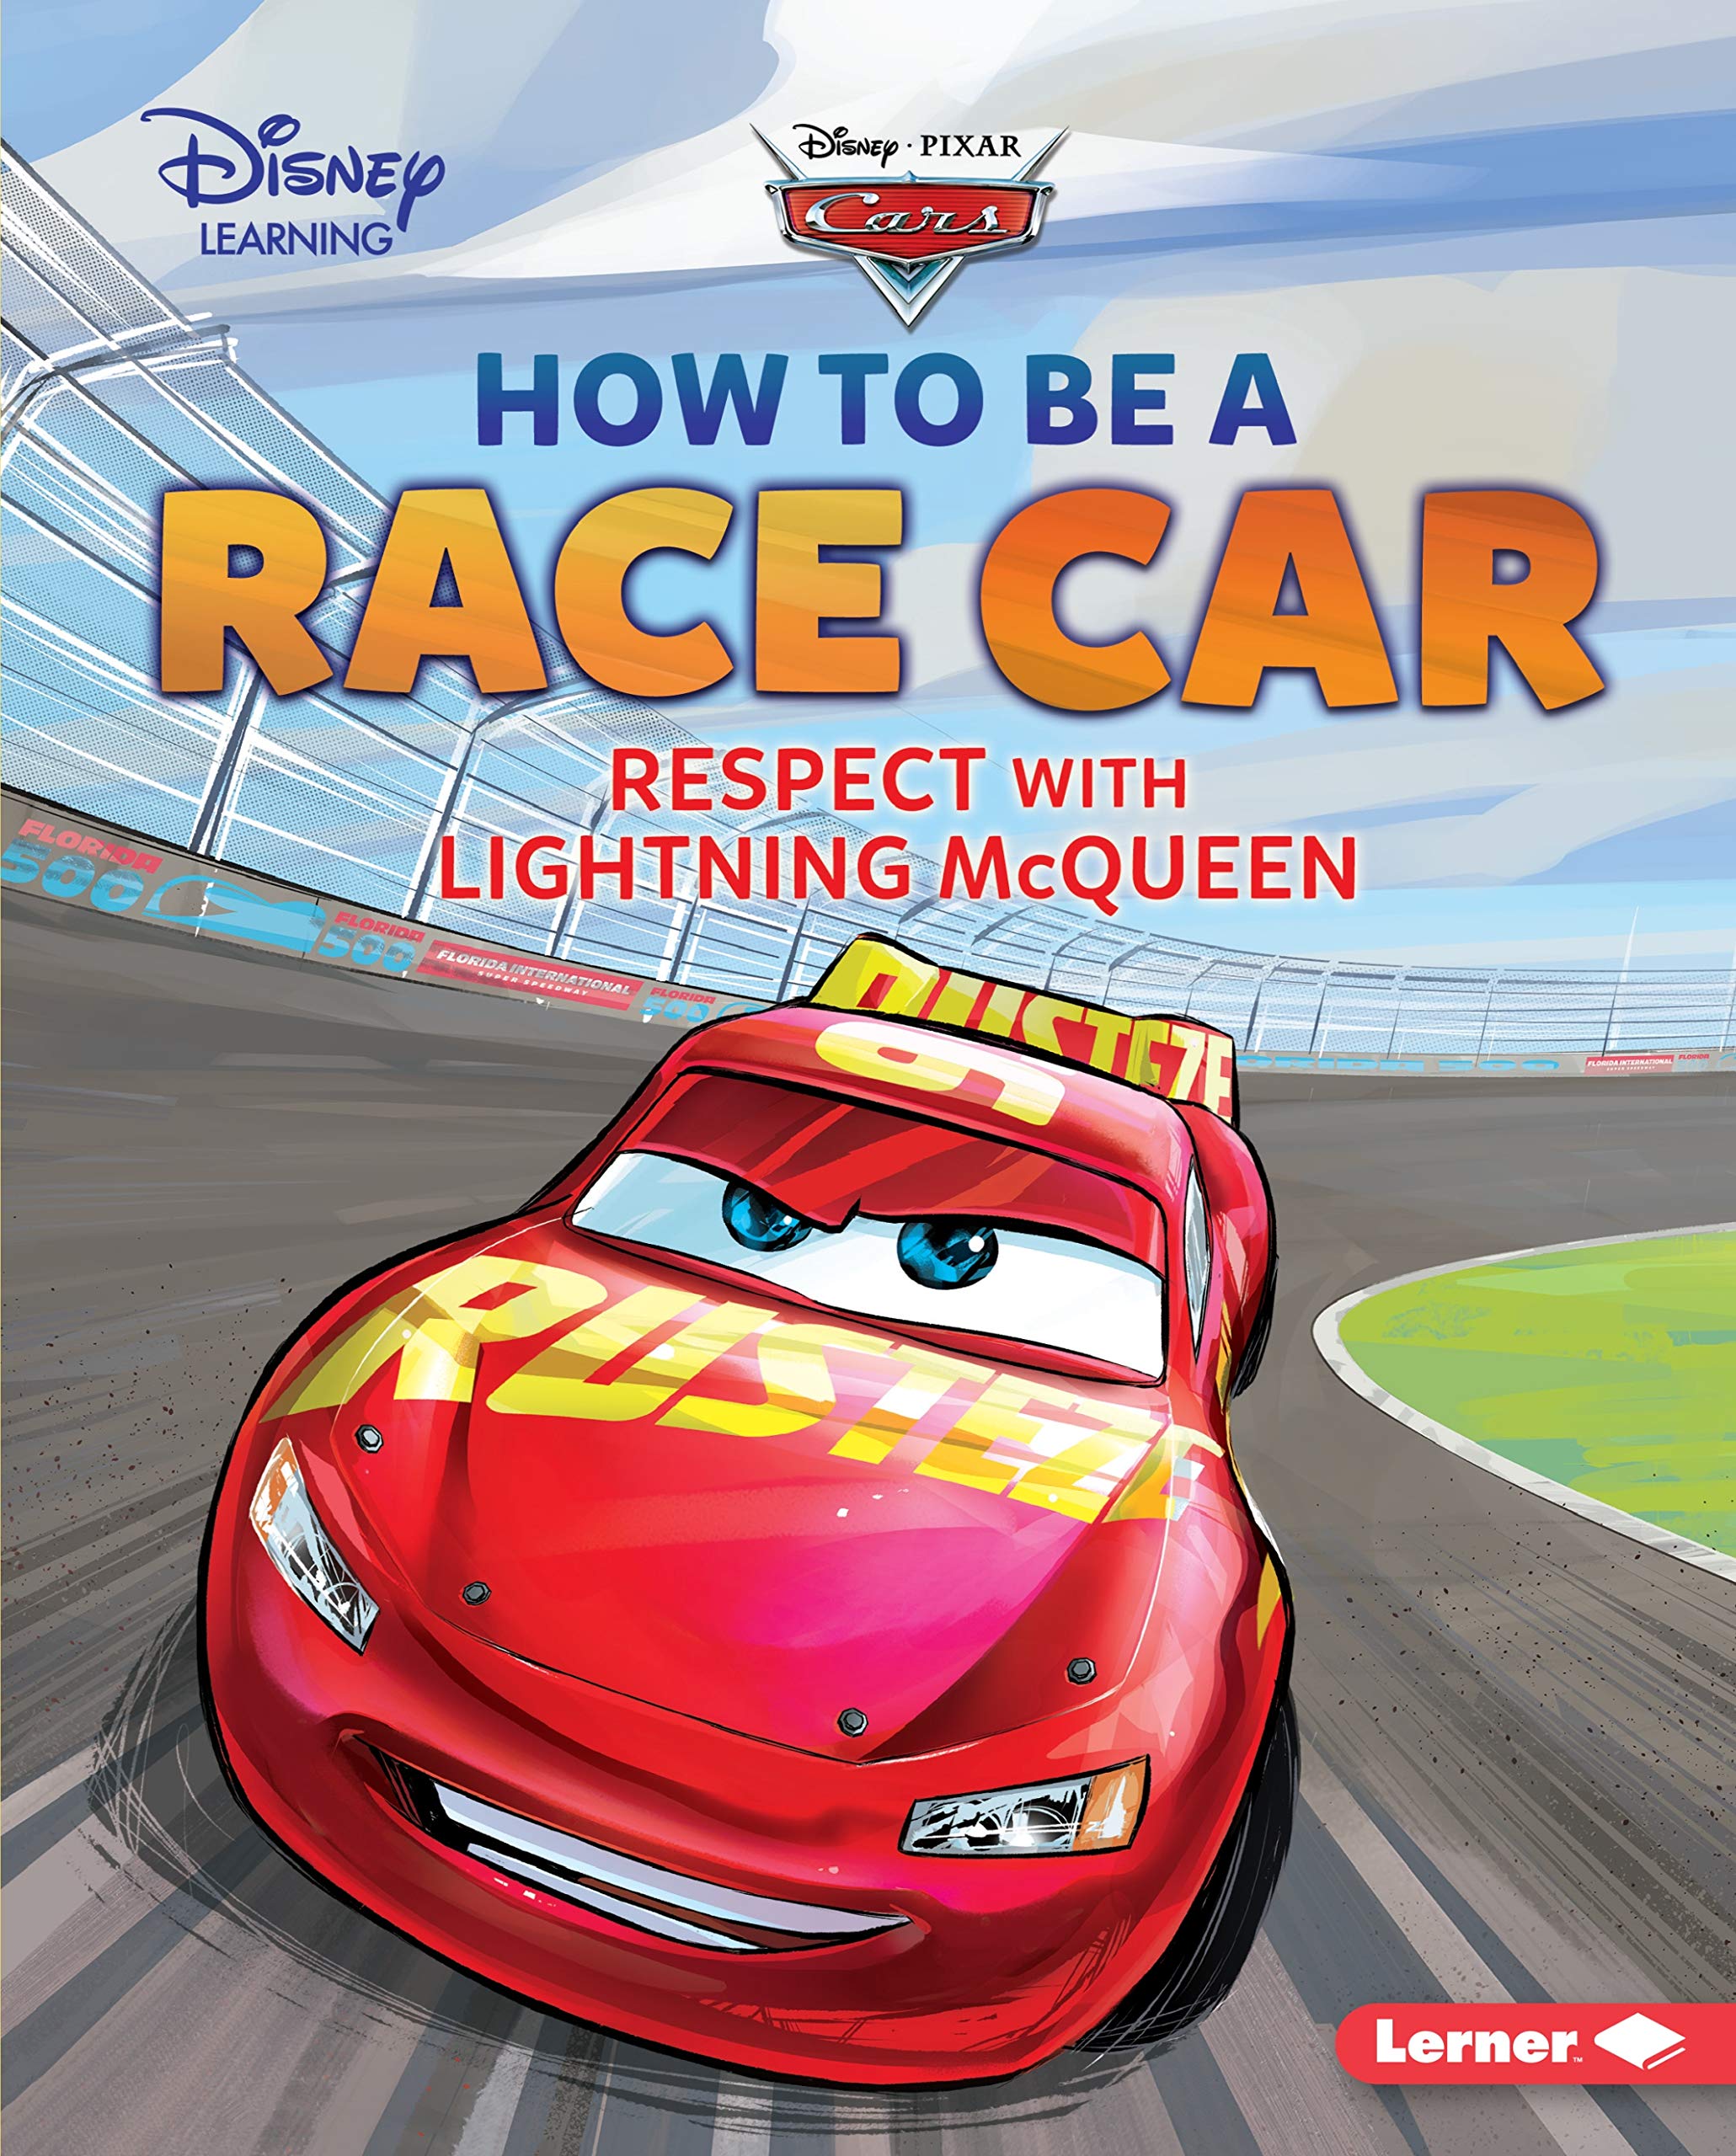 Lerner-Disney-Learning-How-to-be-King-a-Race-Car-by-Mari-Schuh